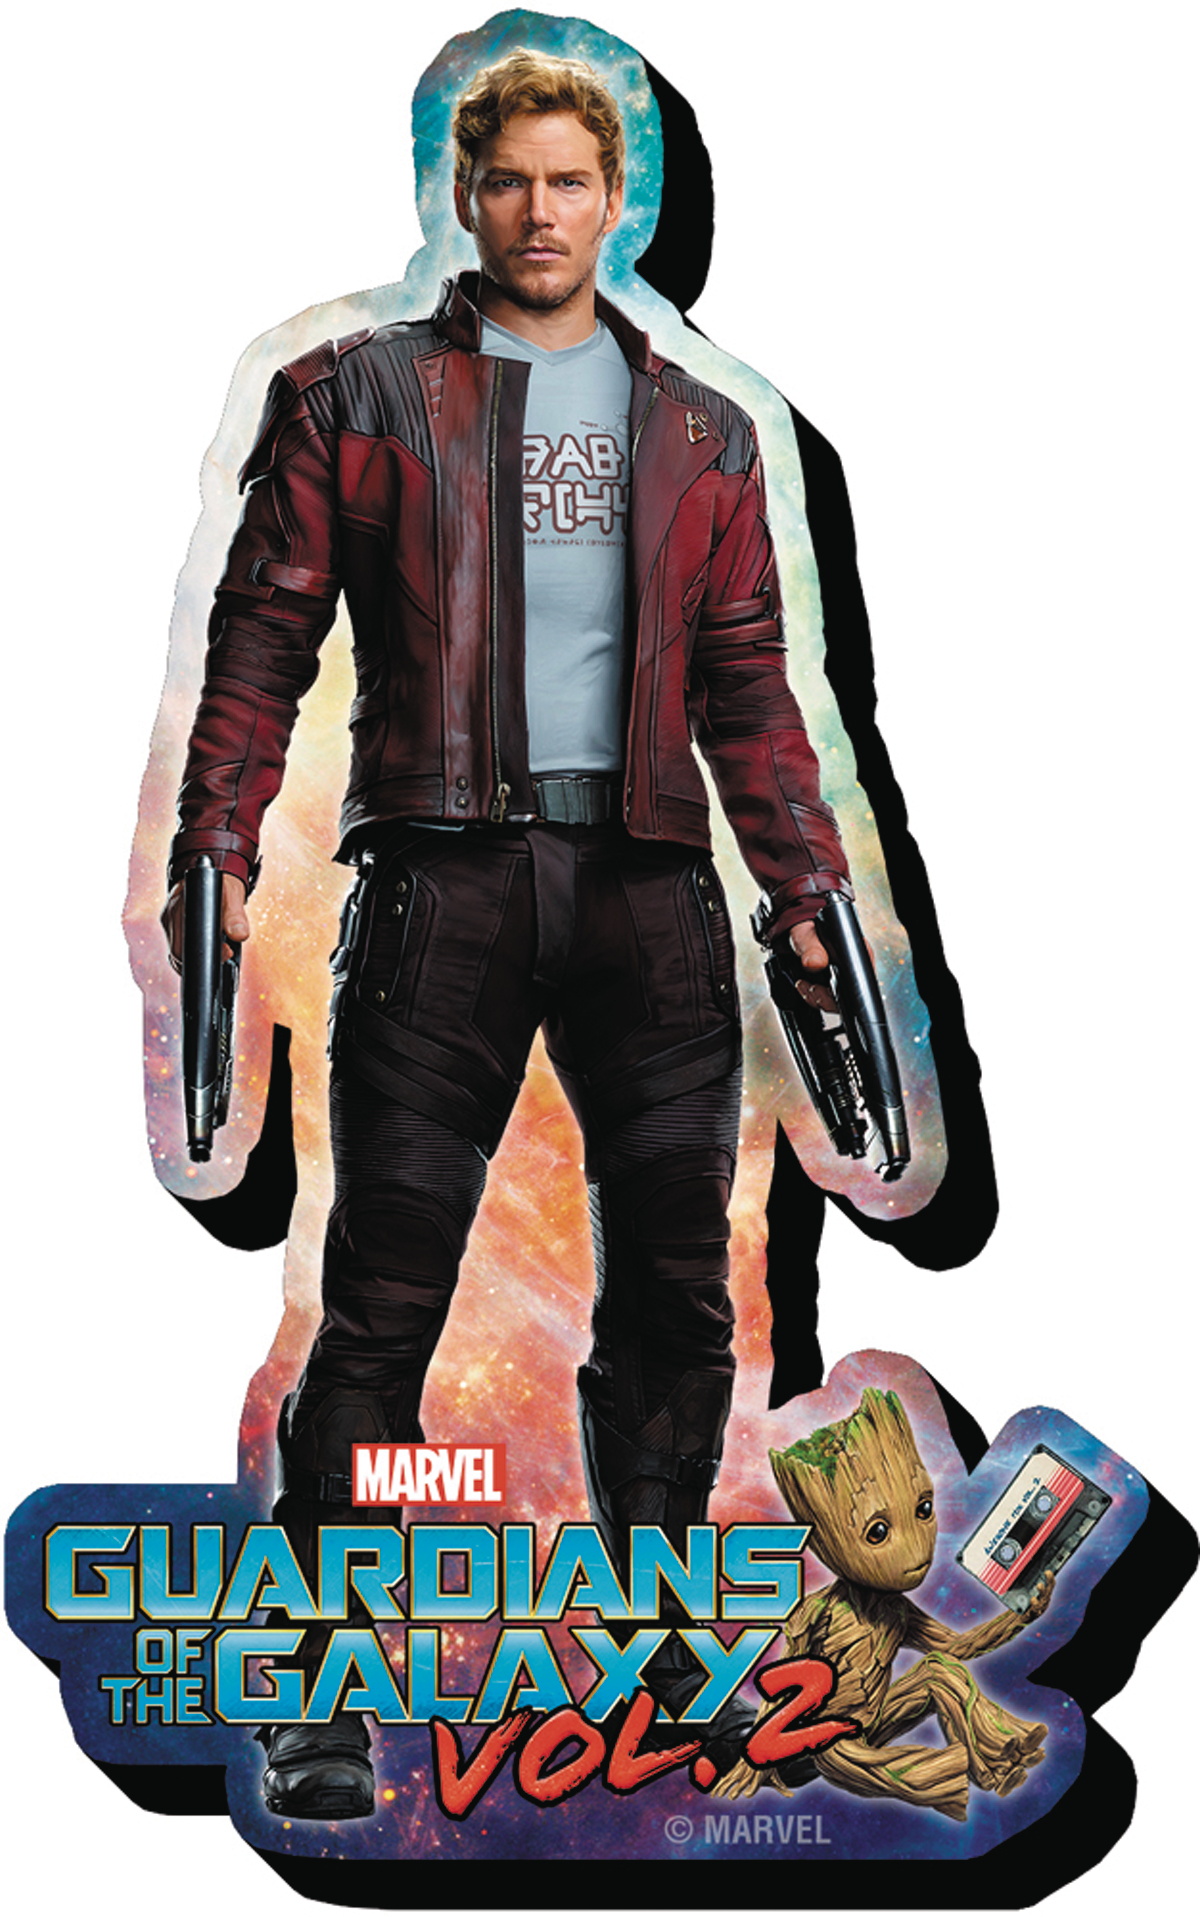 For those that asked for a head swap with Gotg1 Star Lord and the